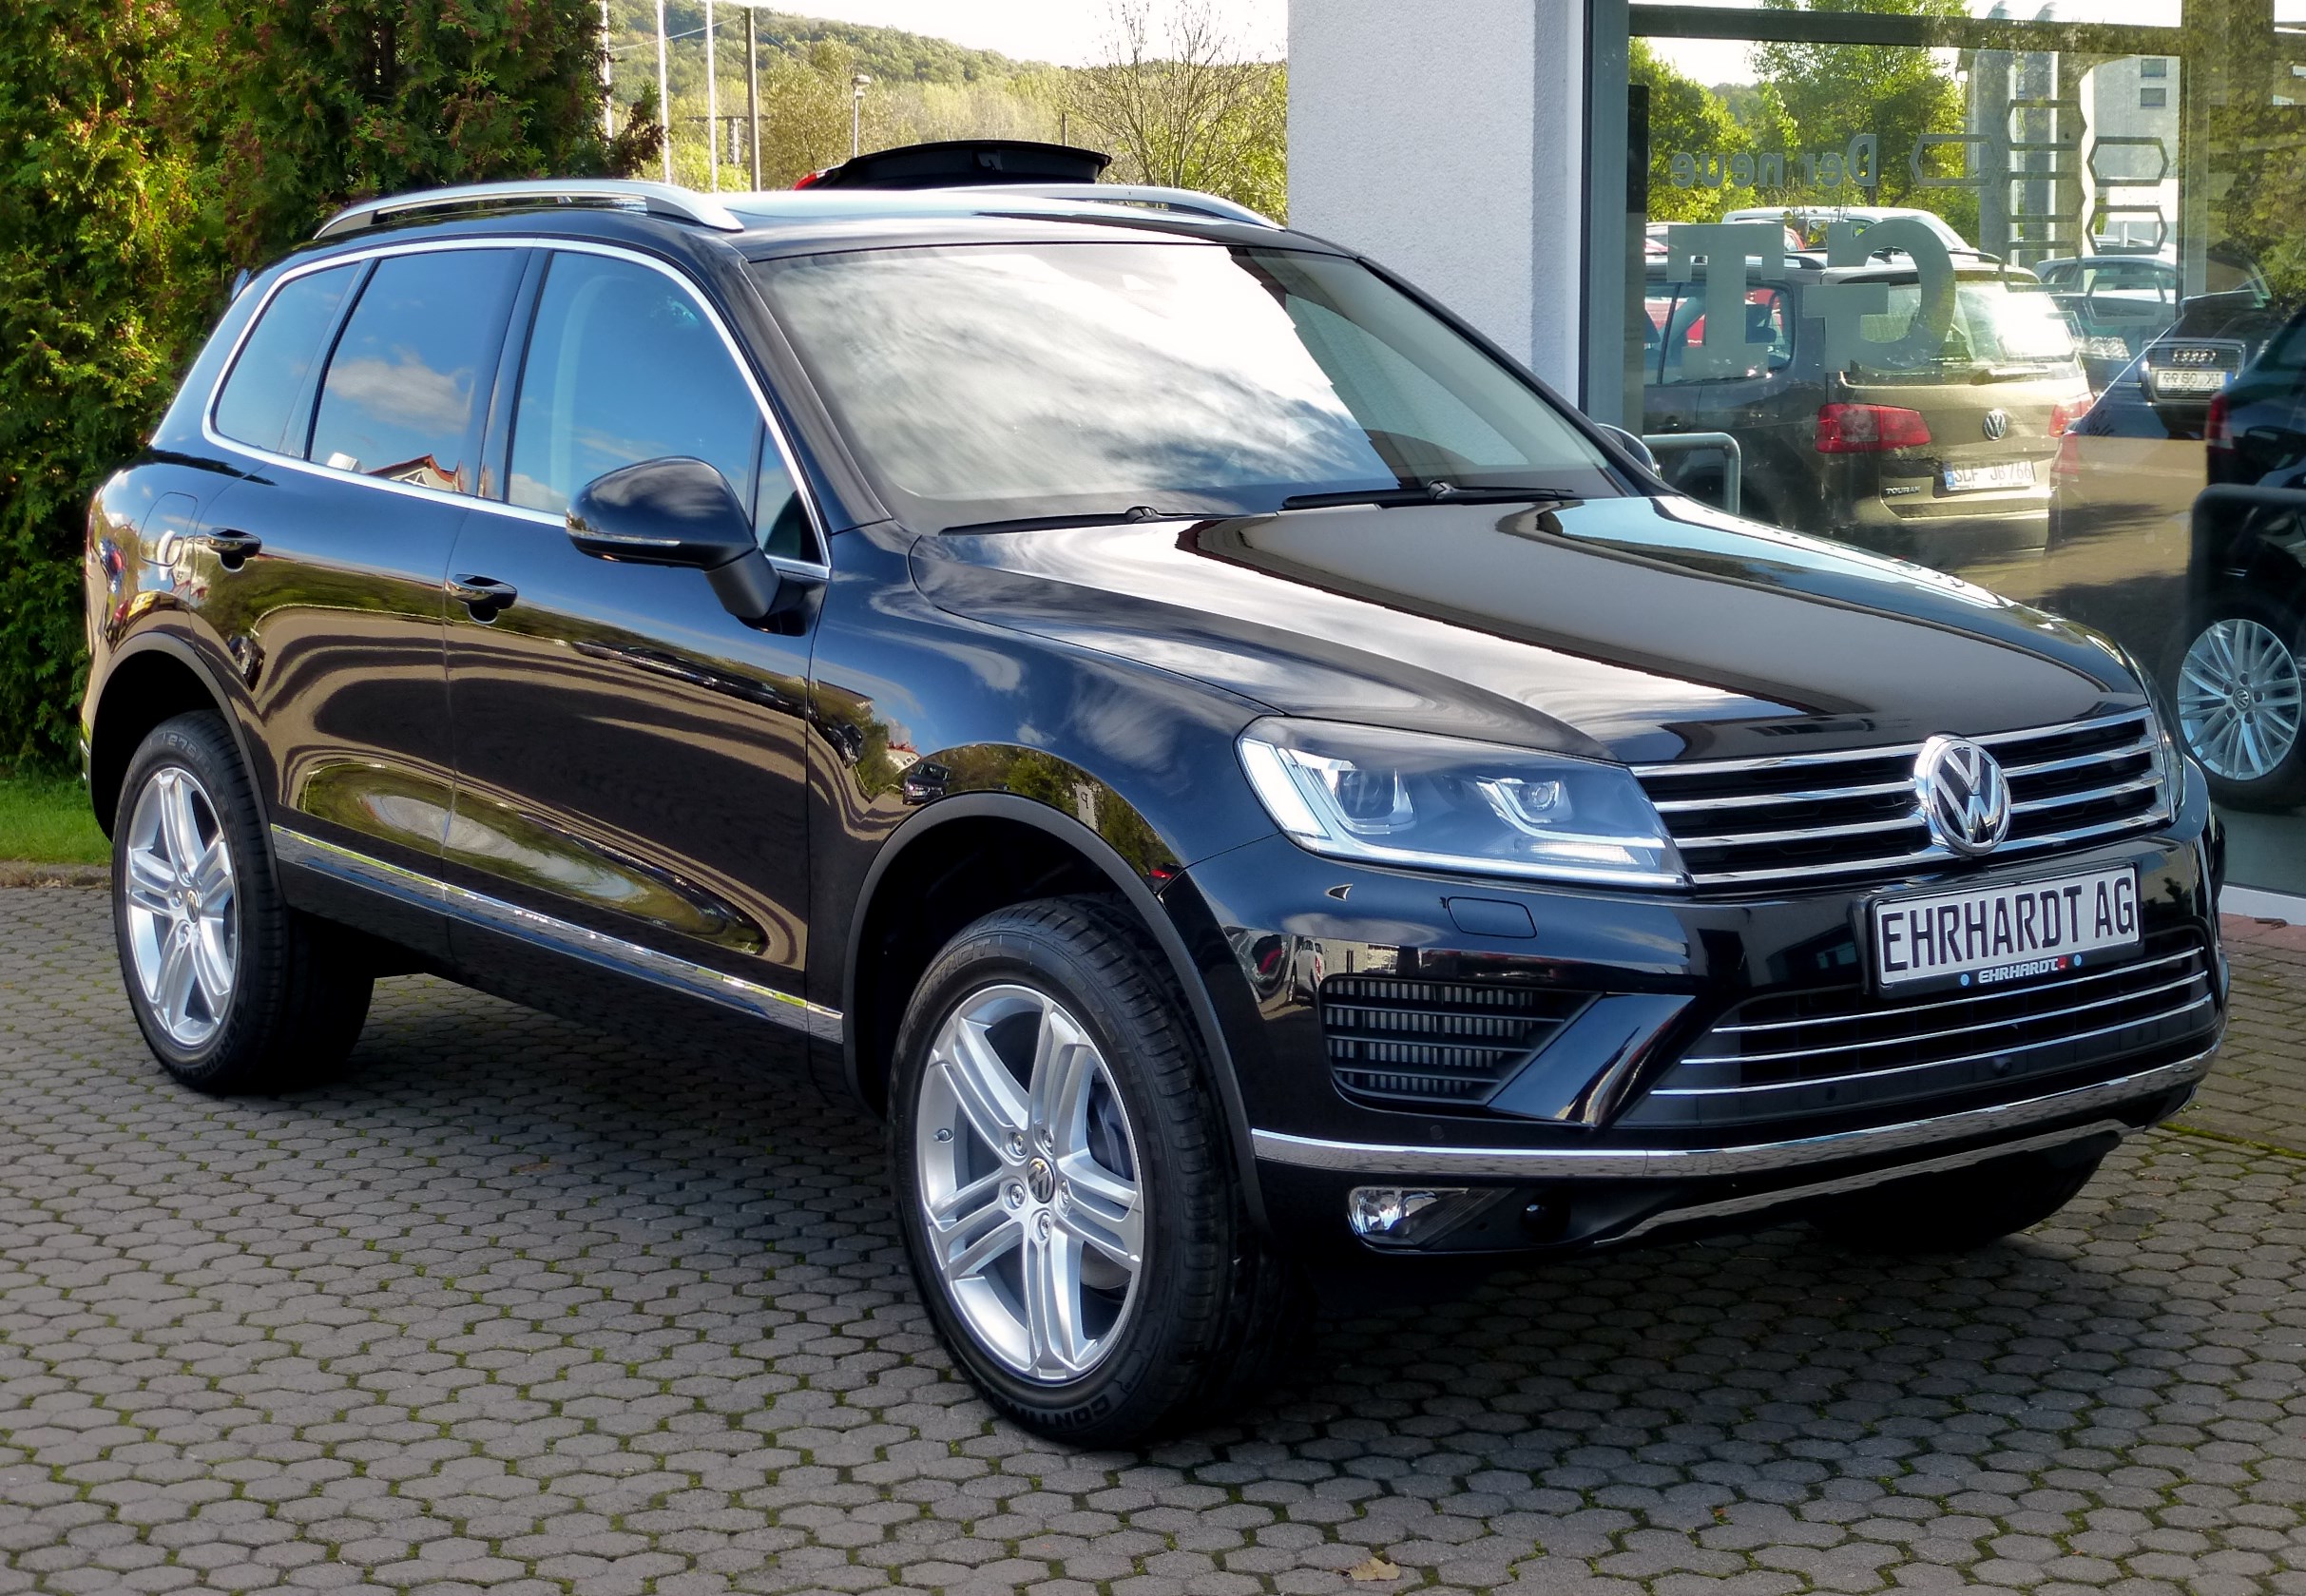 Amazing Volkswagen Touareg Pictures & Backgrounds